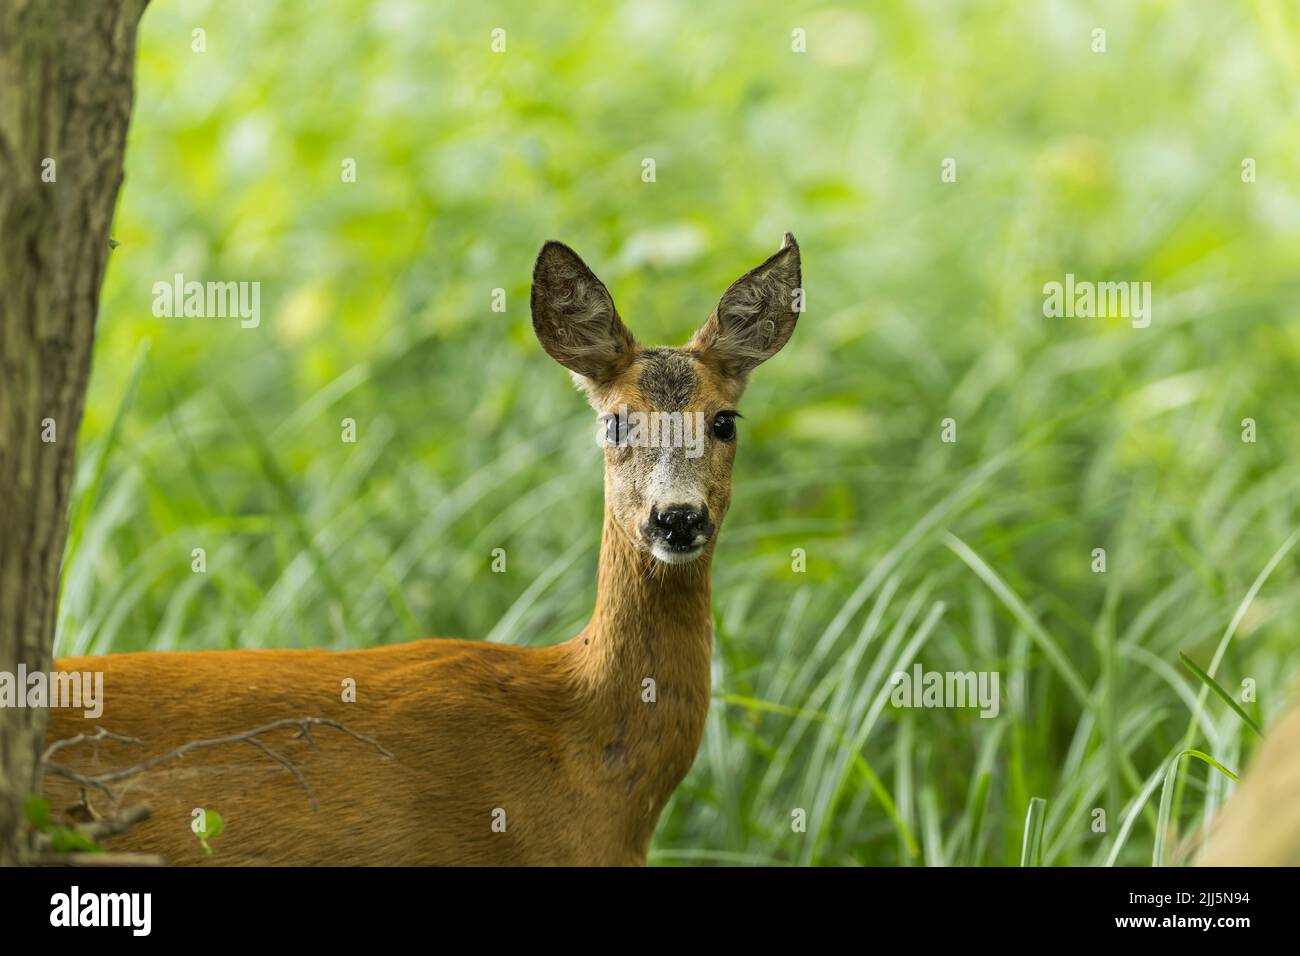 A deer looks attentively from the forest Stock Photo